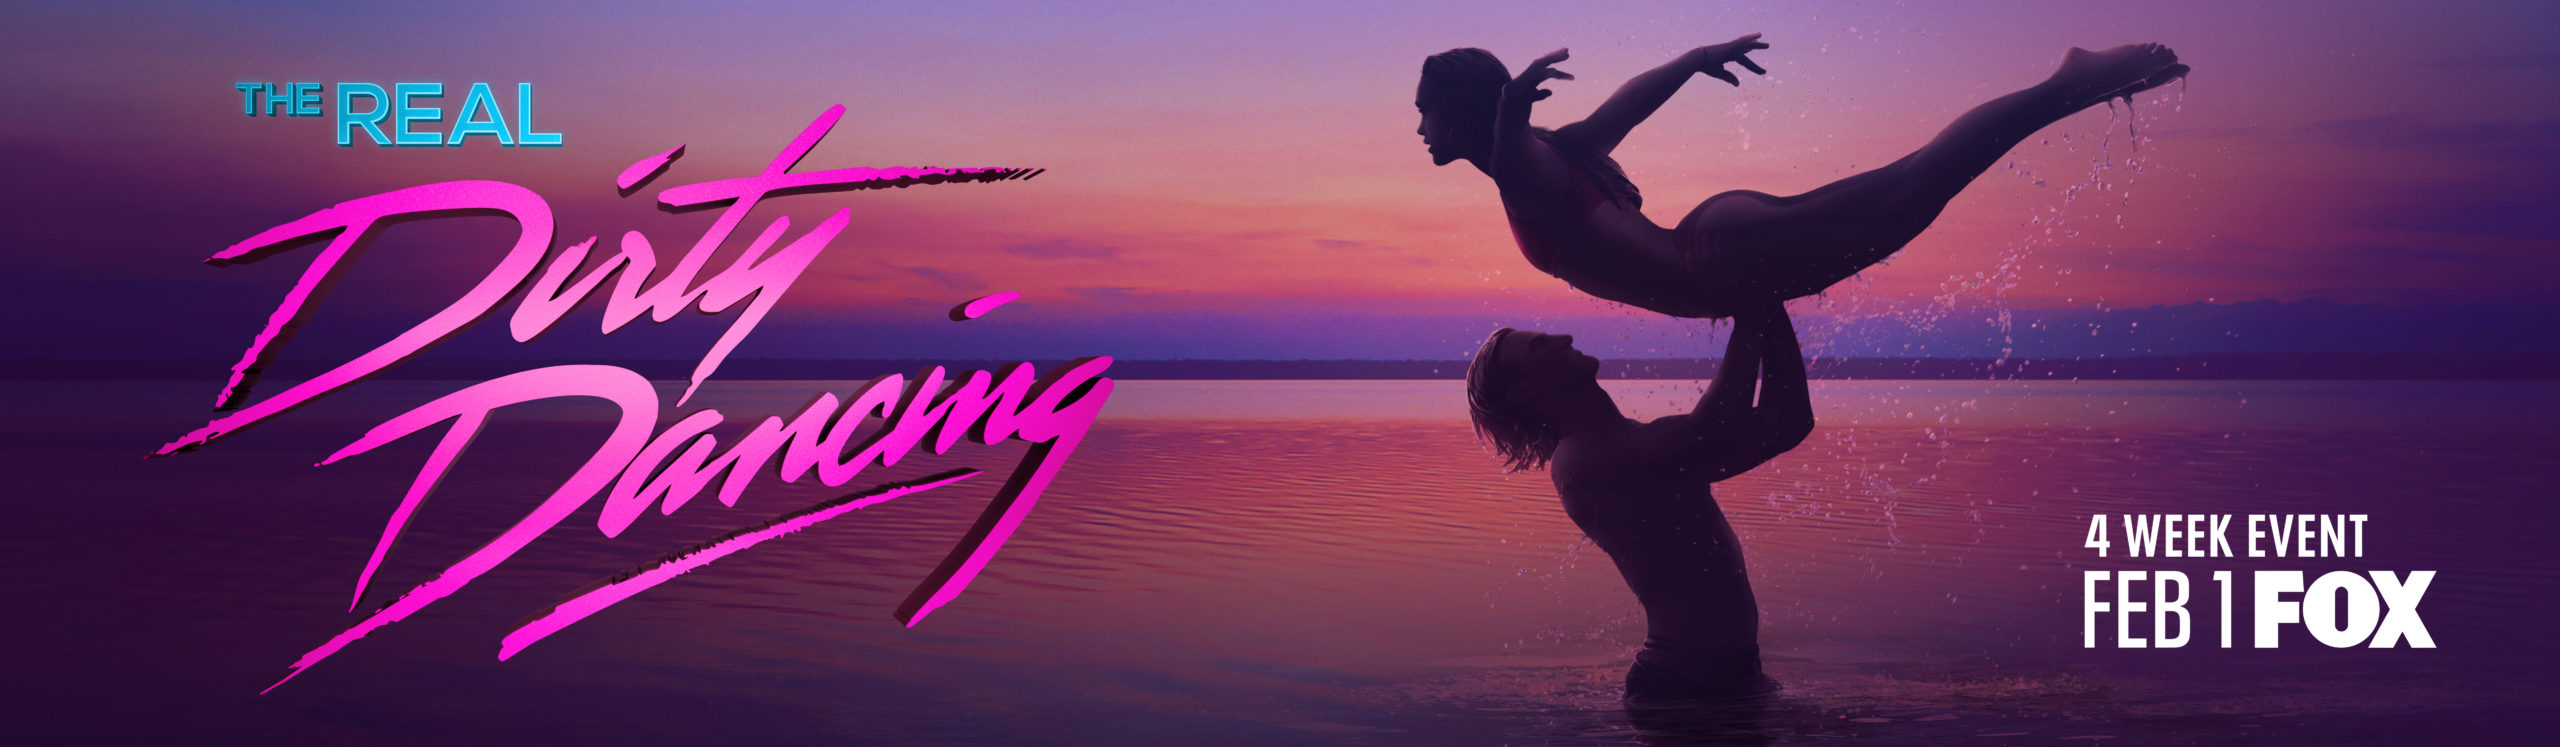 THE ALL-NEW CELEBRITY DANCE COMPETITION “THE REAL DIRTY DANCING” | Fox 11  Tri Cities Fox 41 Yakima